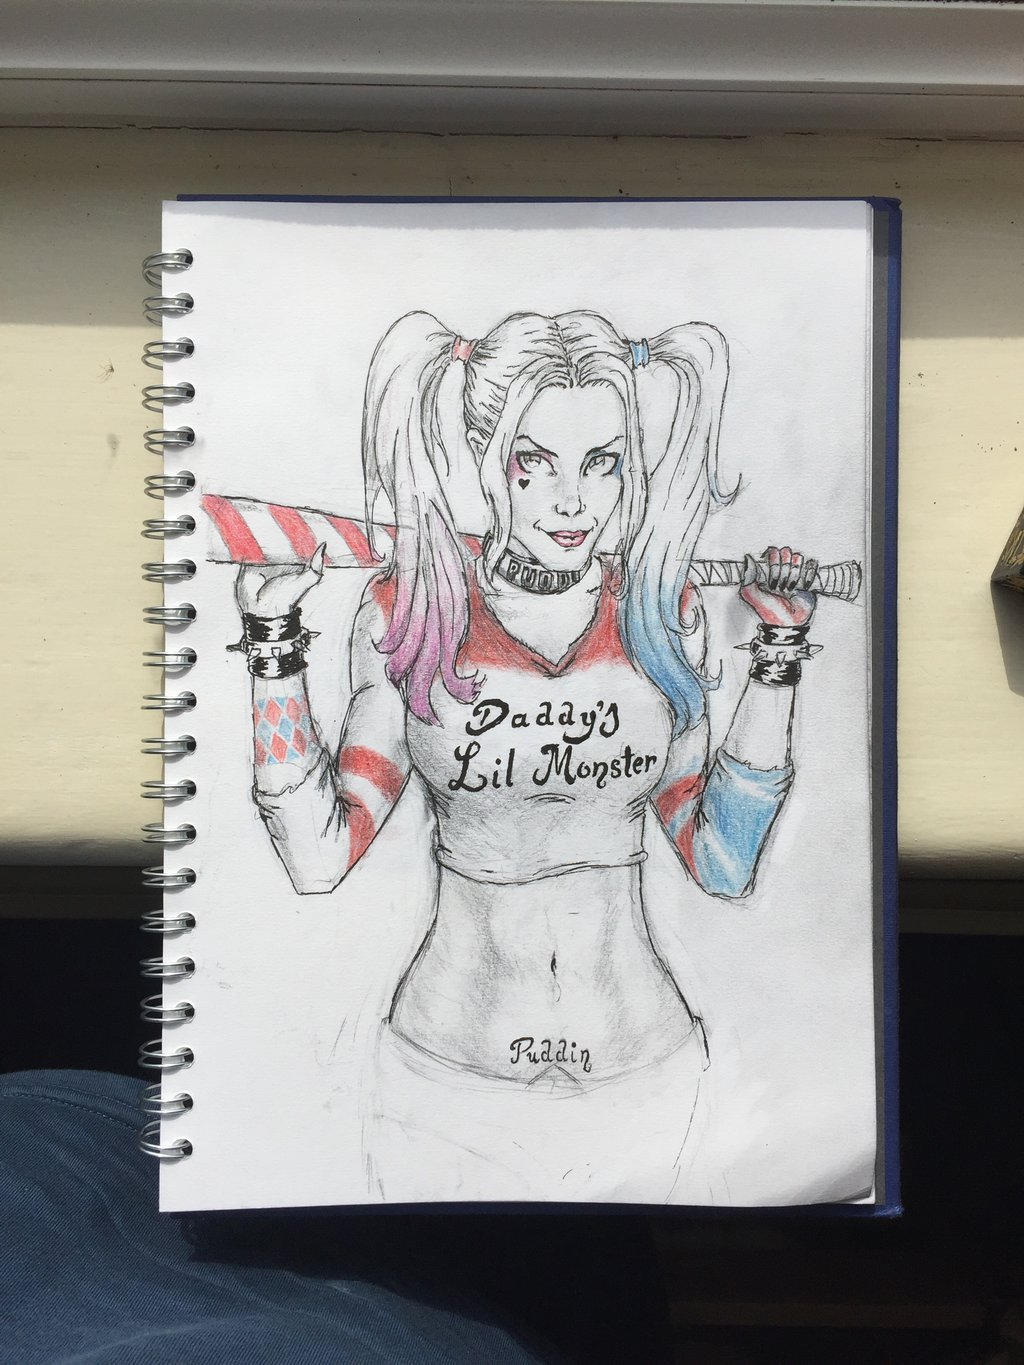 Harley quinn and joker pencil drawing, what disorder does joker have? 